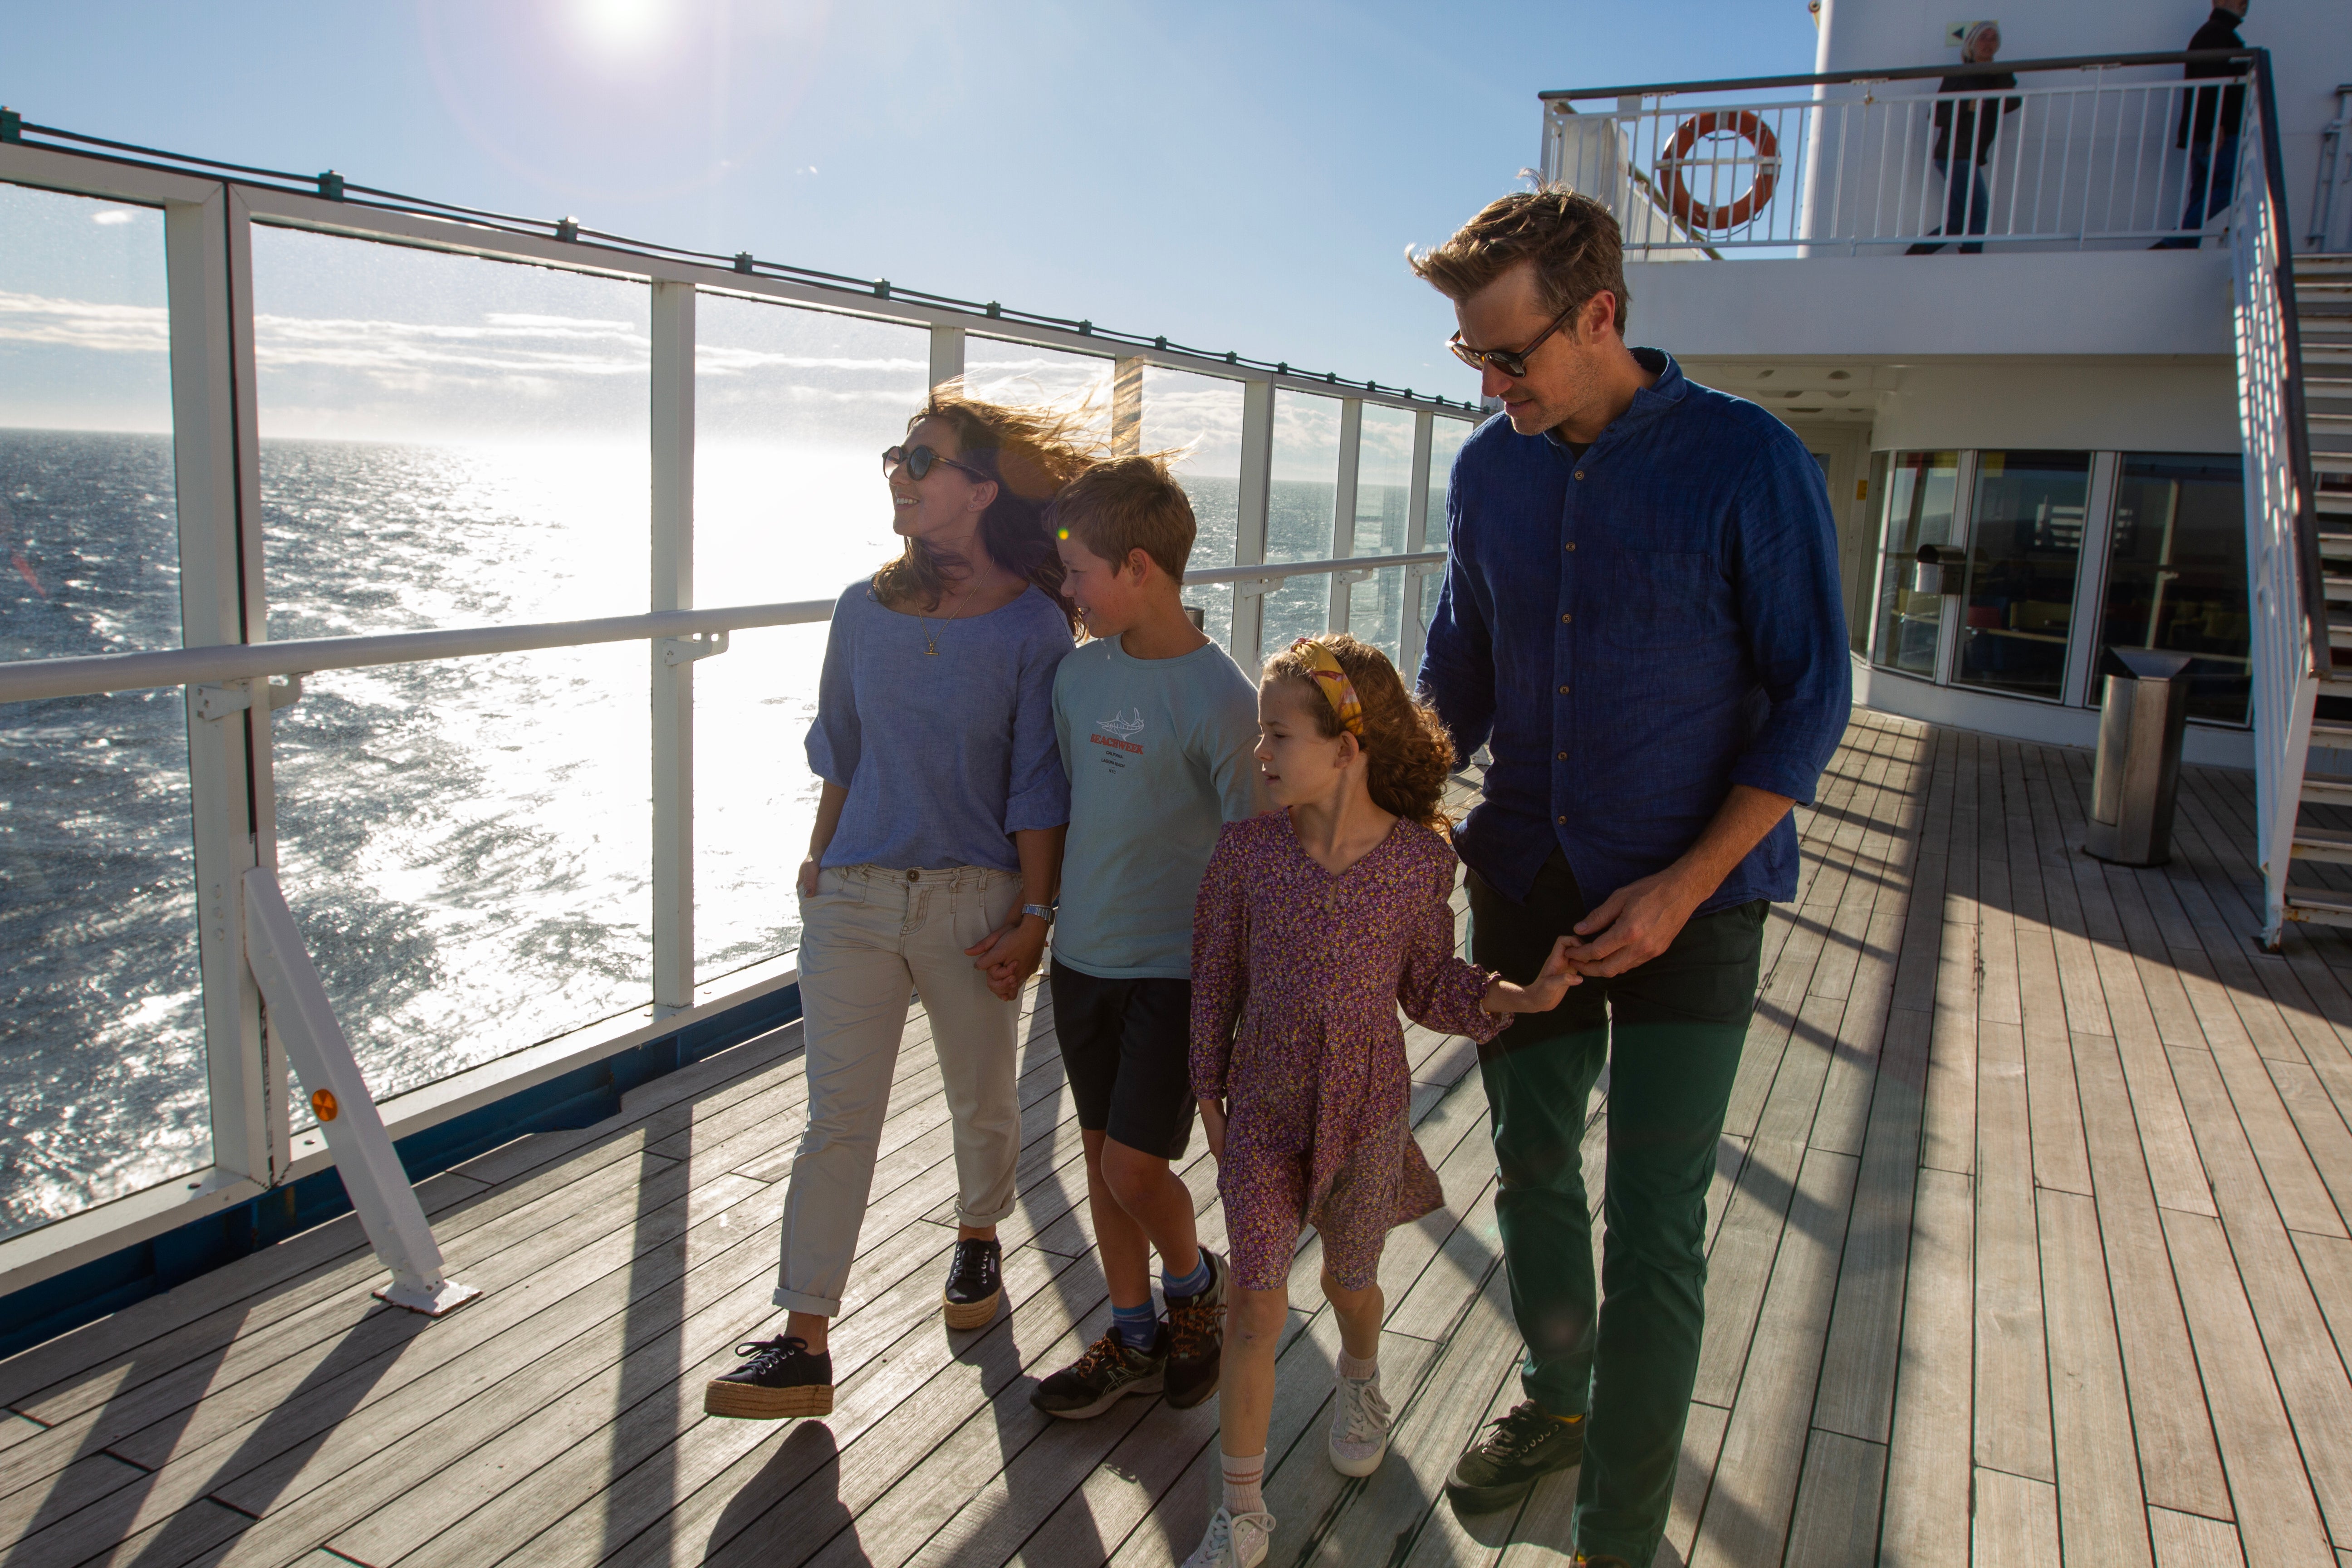 Enjoy a relaxing, indulgent trip from start to finish with Brittany Ferries